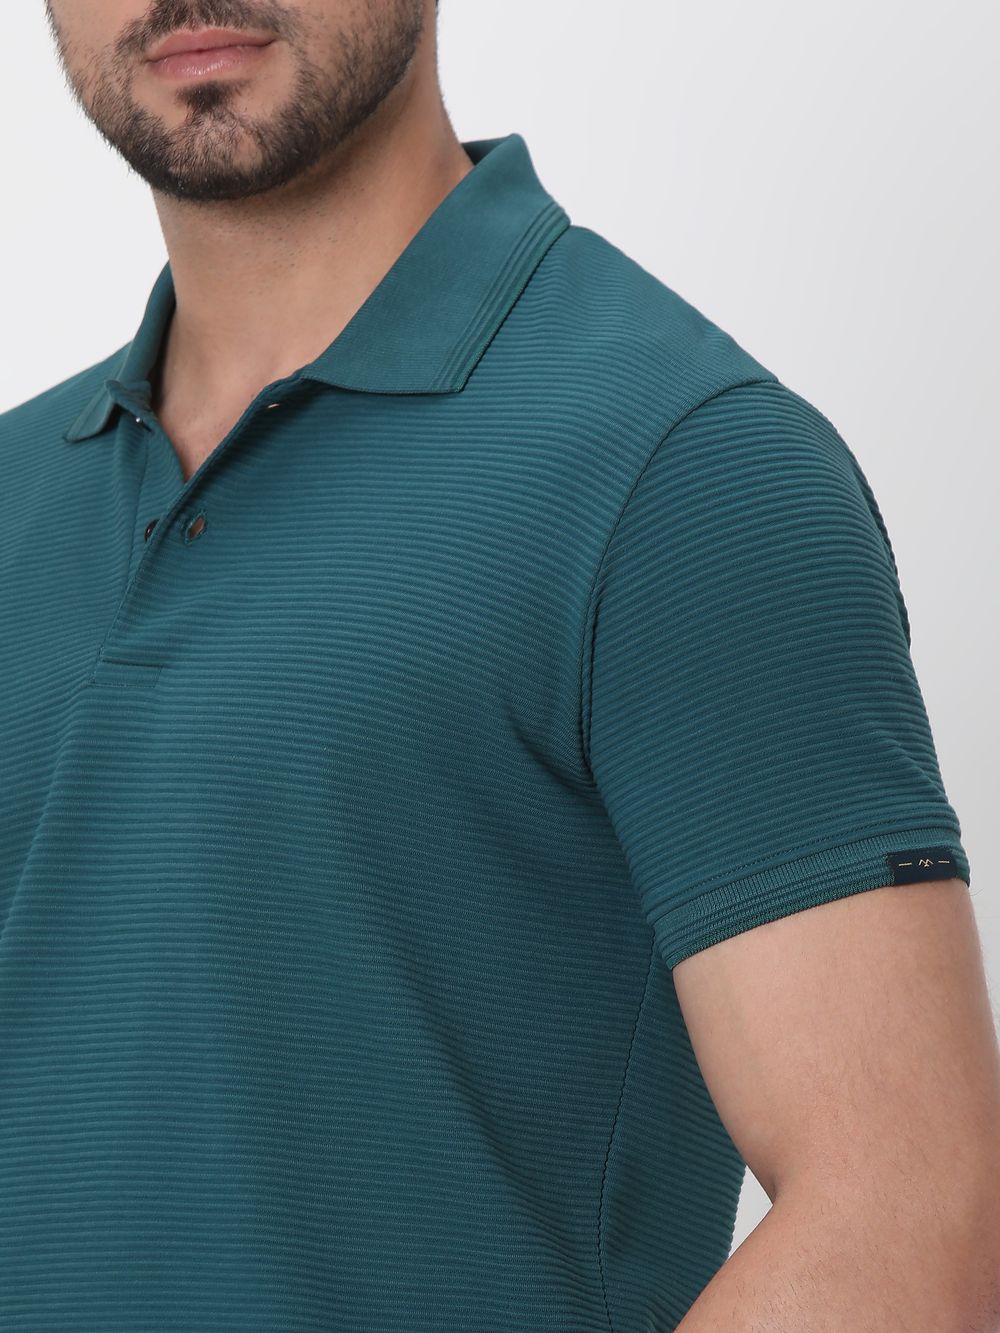 Teal Textured Plain Slim Fit Polo